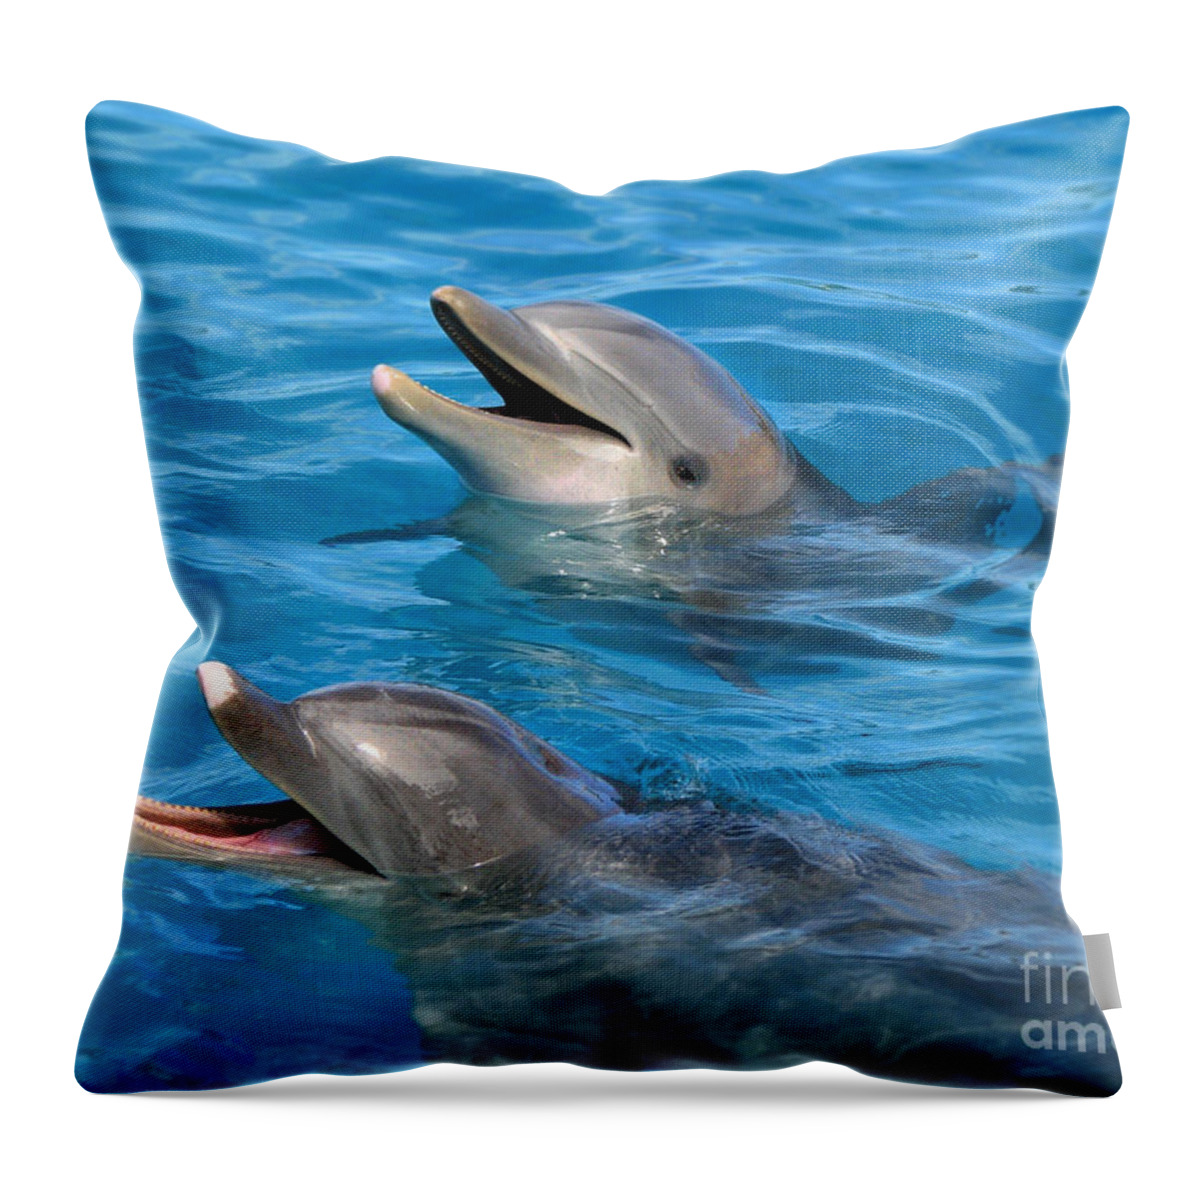 Dolphins Throw Pillow featuring the photograph Dolphins by Kristine Widney